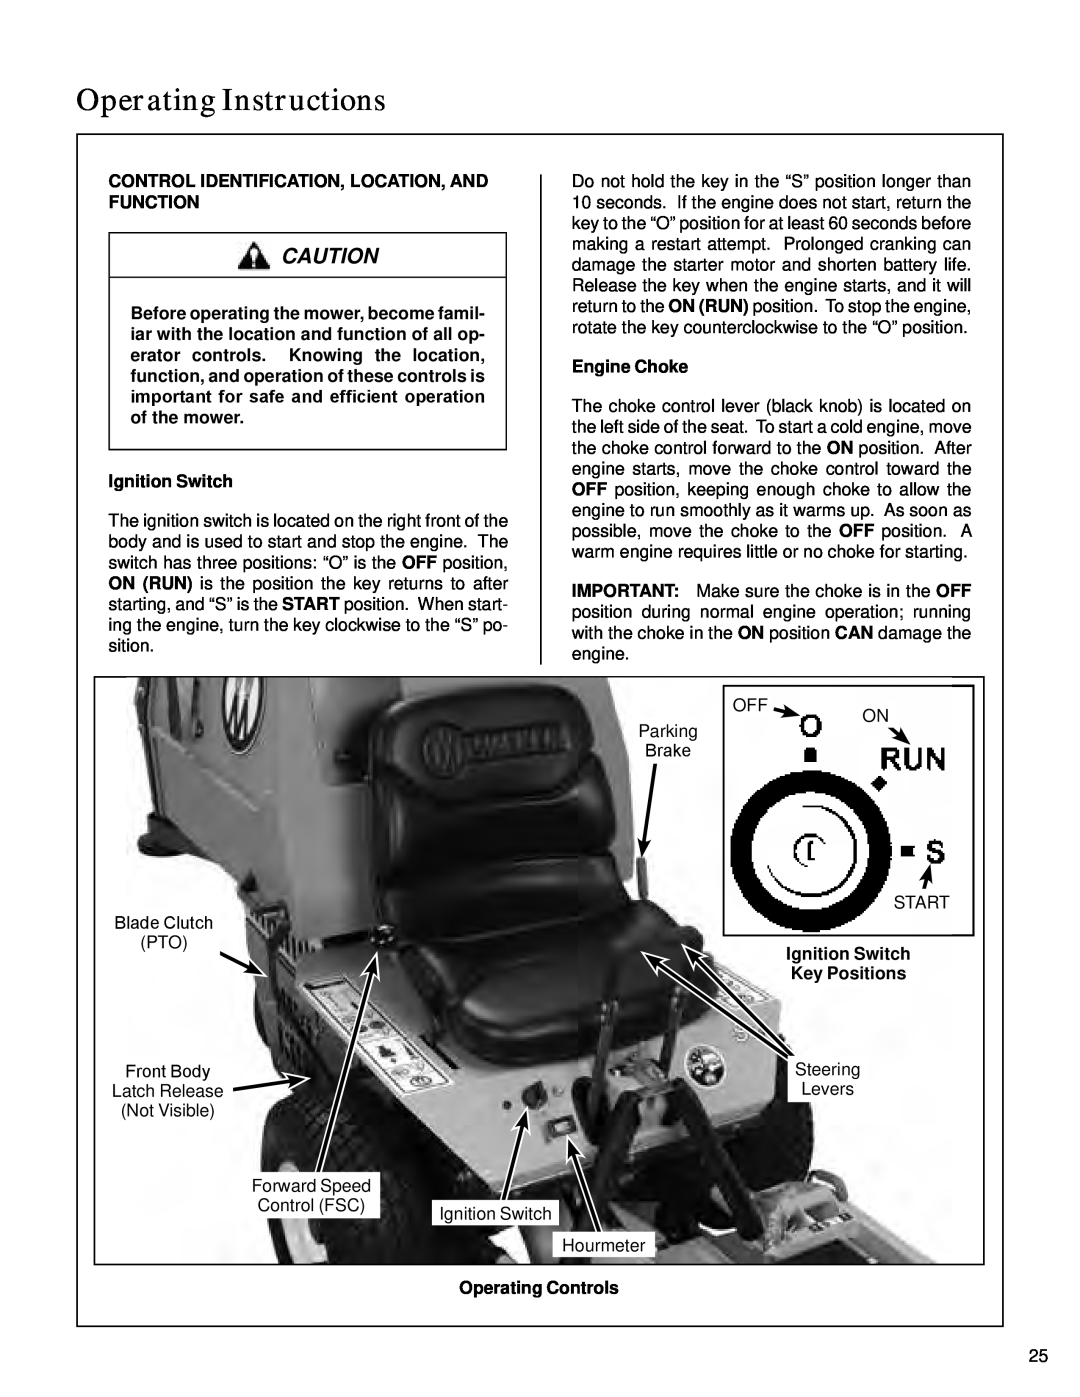 Walker S14 manual Operating Instructions, Control Identification, Location, And Function, Ignition Switch, Engine Choke 